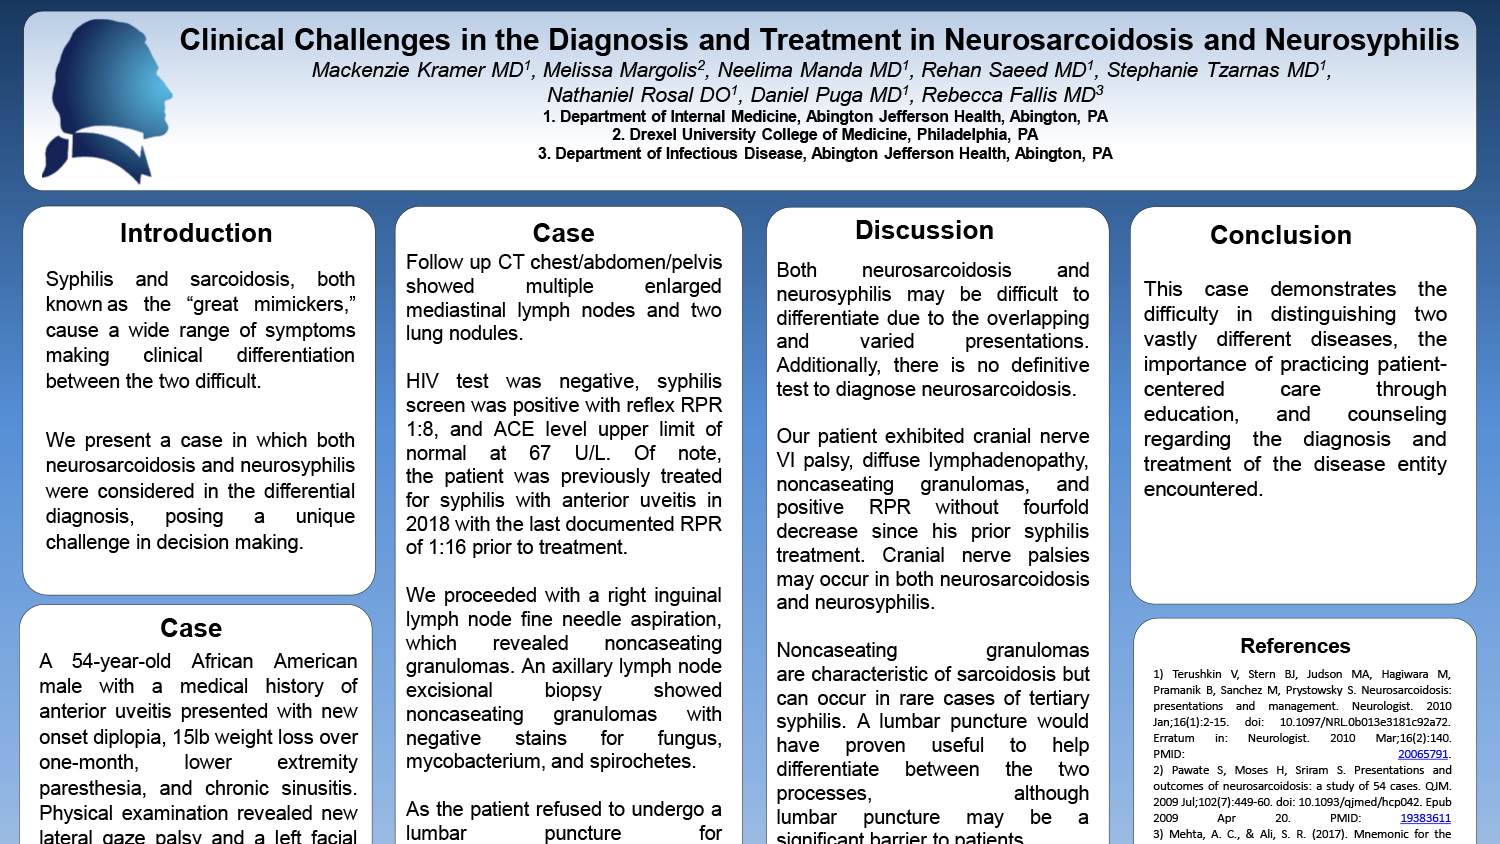 Mackenzie Kramer - PAS-27-Clinical-Challenges-in-the-Diagnosis-and-Treatment-in-Neurosarcoidosis-and-Neurosyphilis